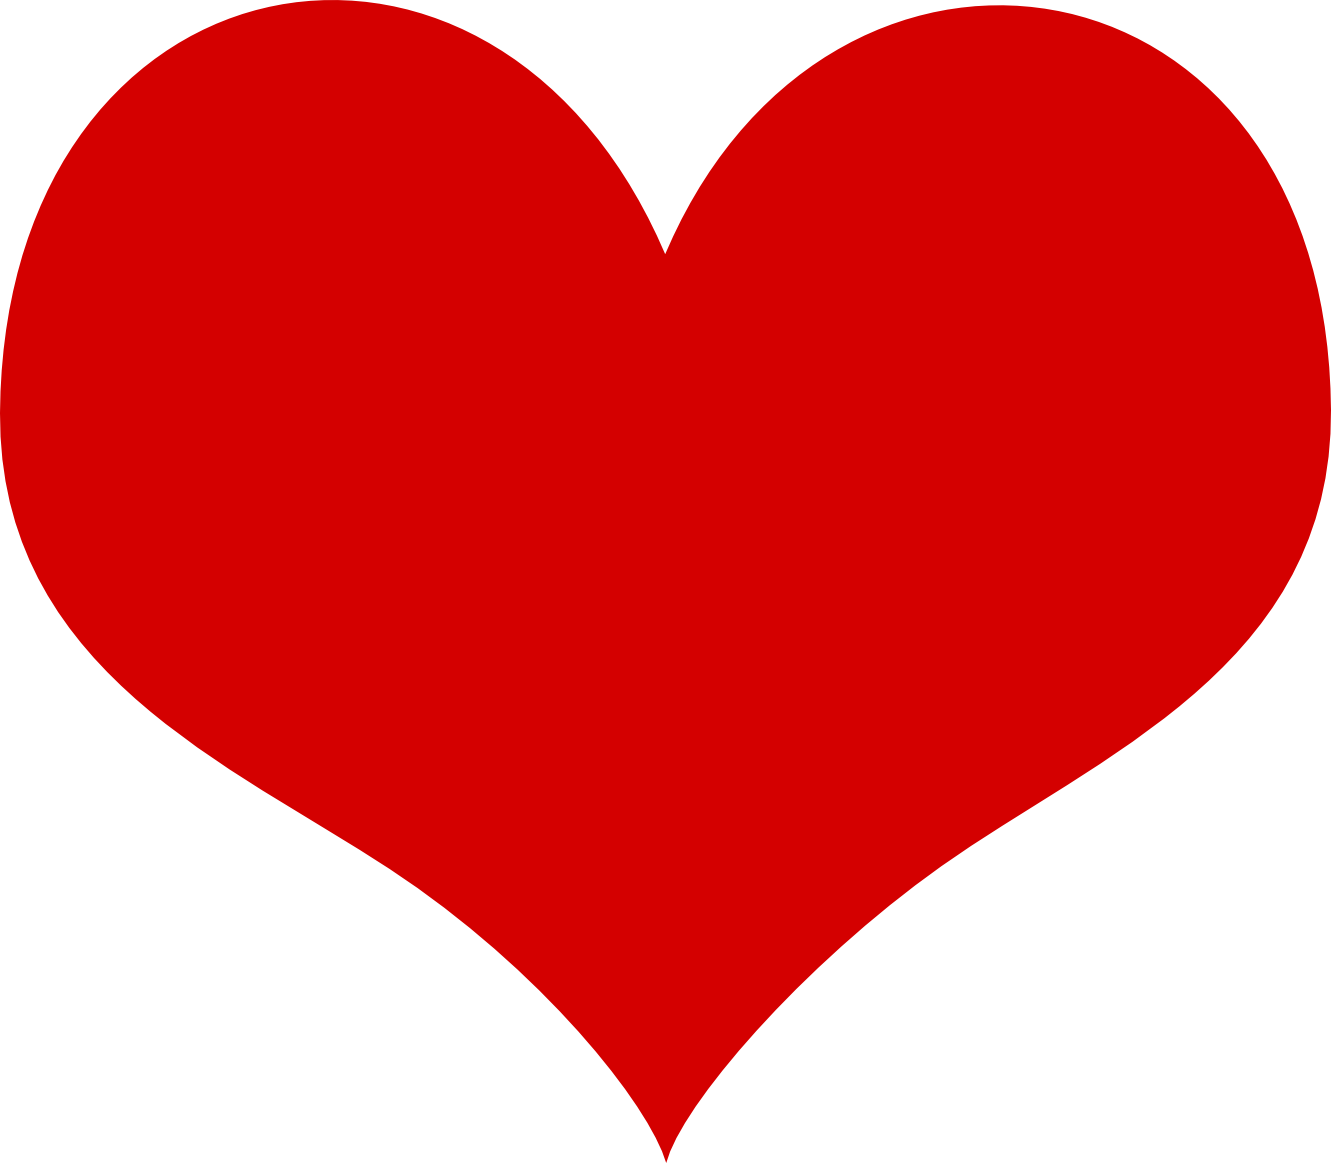 Red heart PNG image, free download